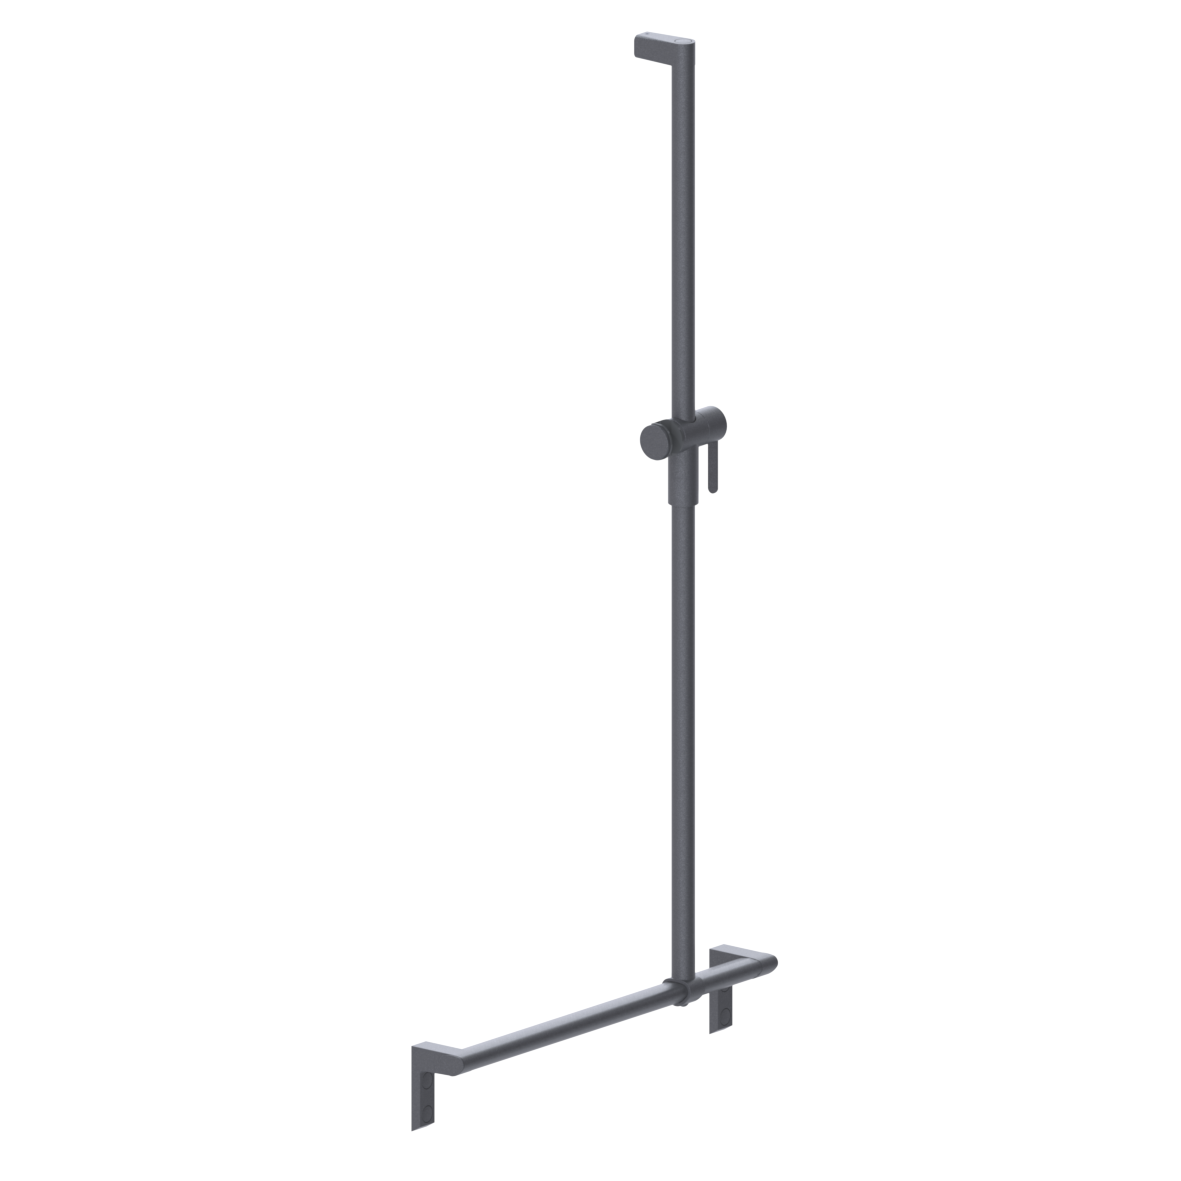 Cavere Care Shower handrail, with movable shower handrail, left and right, 600 x 1200 mm, Cavere Metallic anthracite